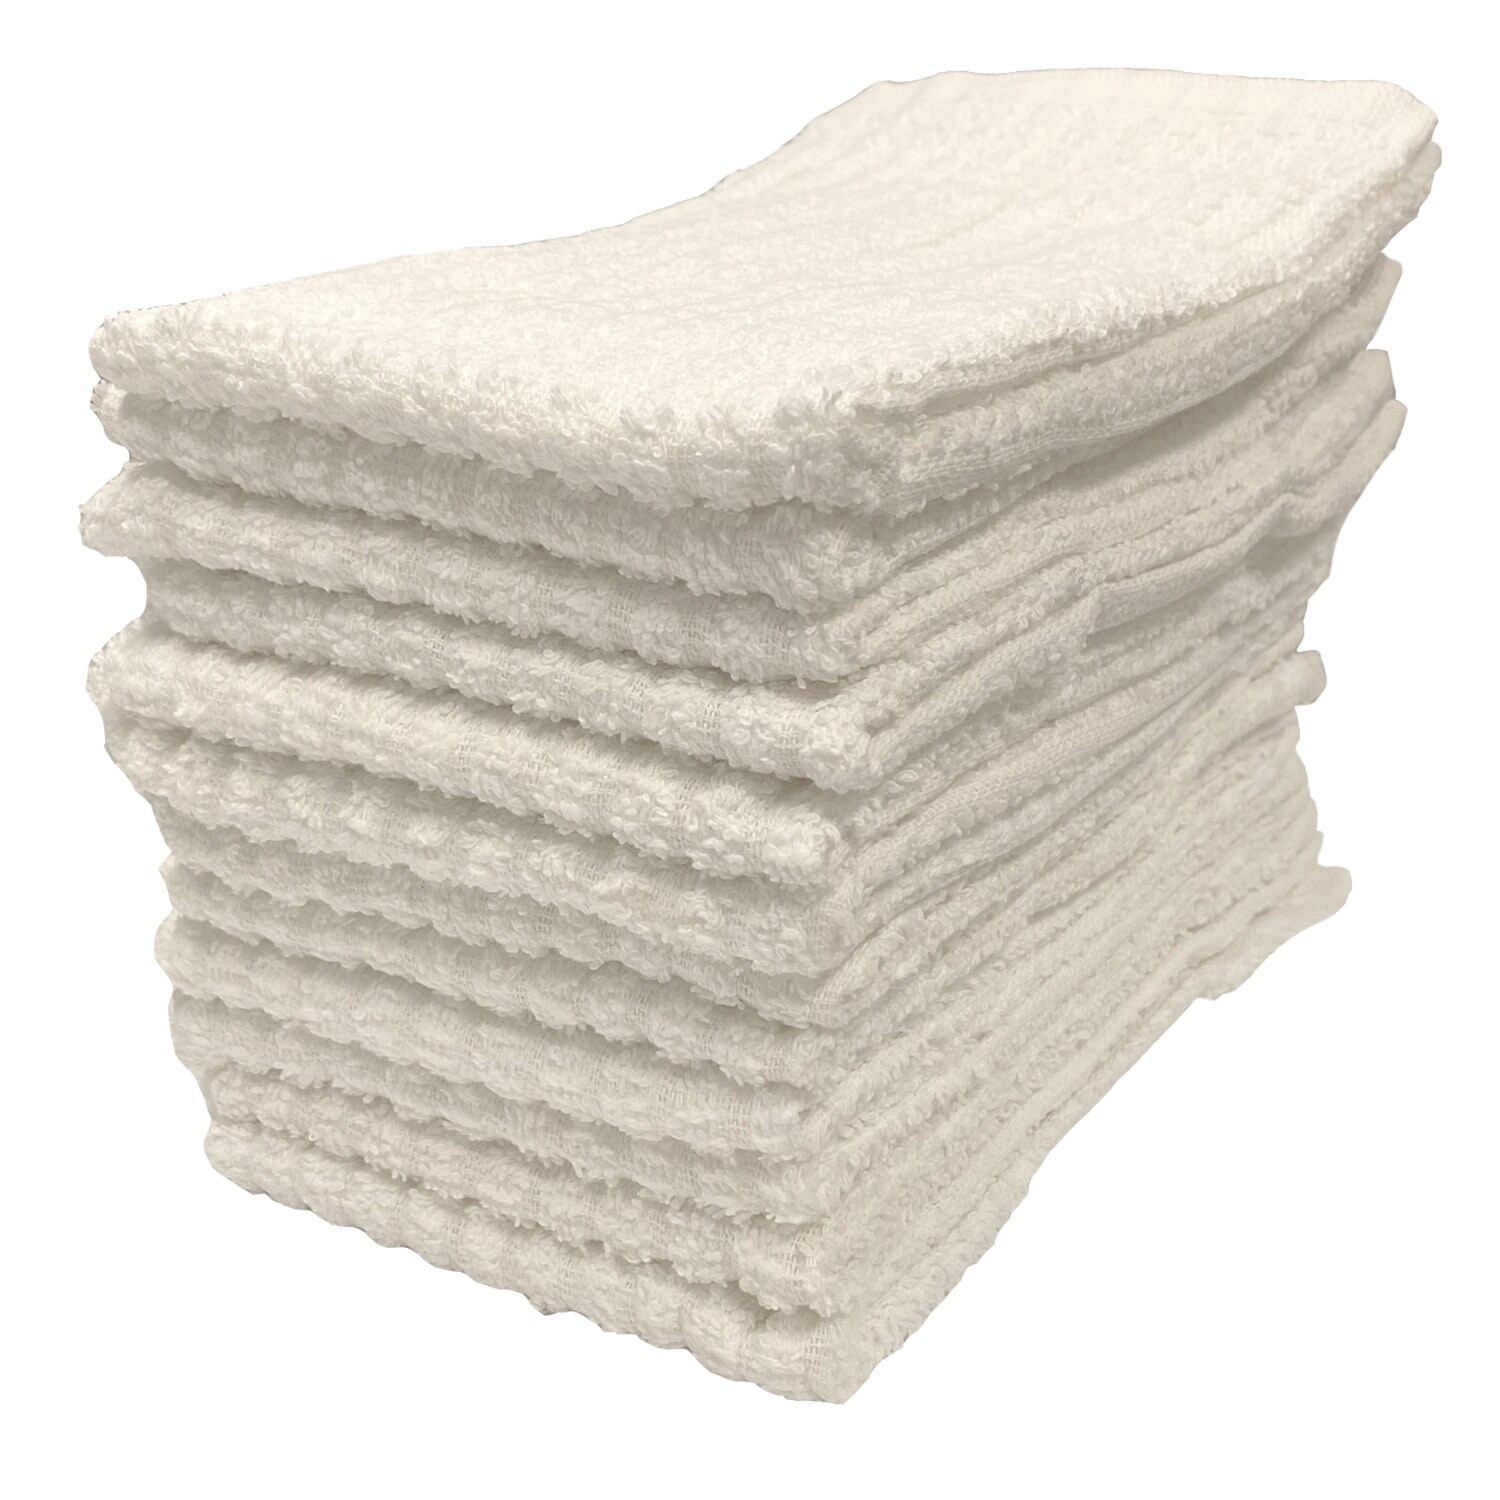 12-pack 16x19 In Kitchen Towel Bar Mops Cleaning Towels 